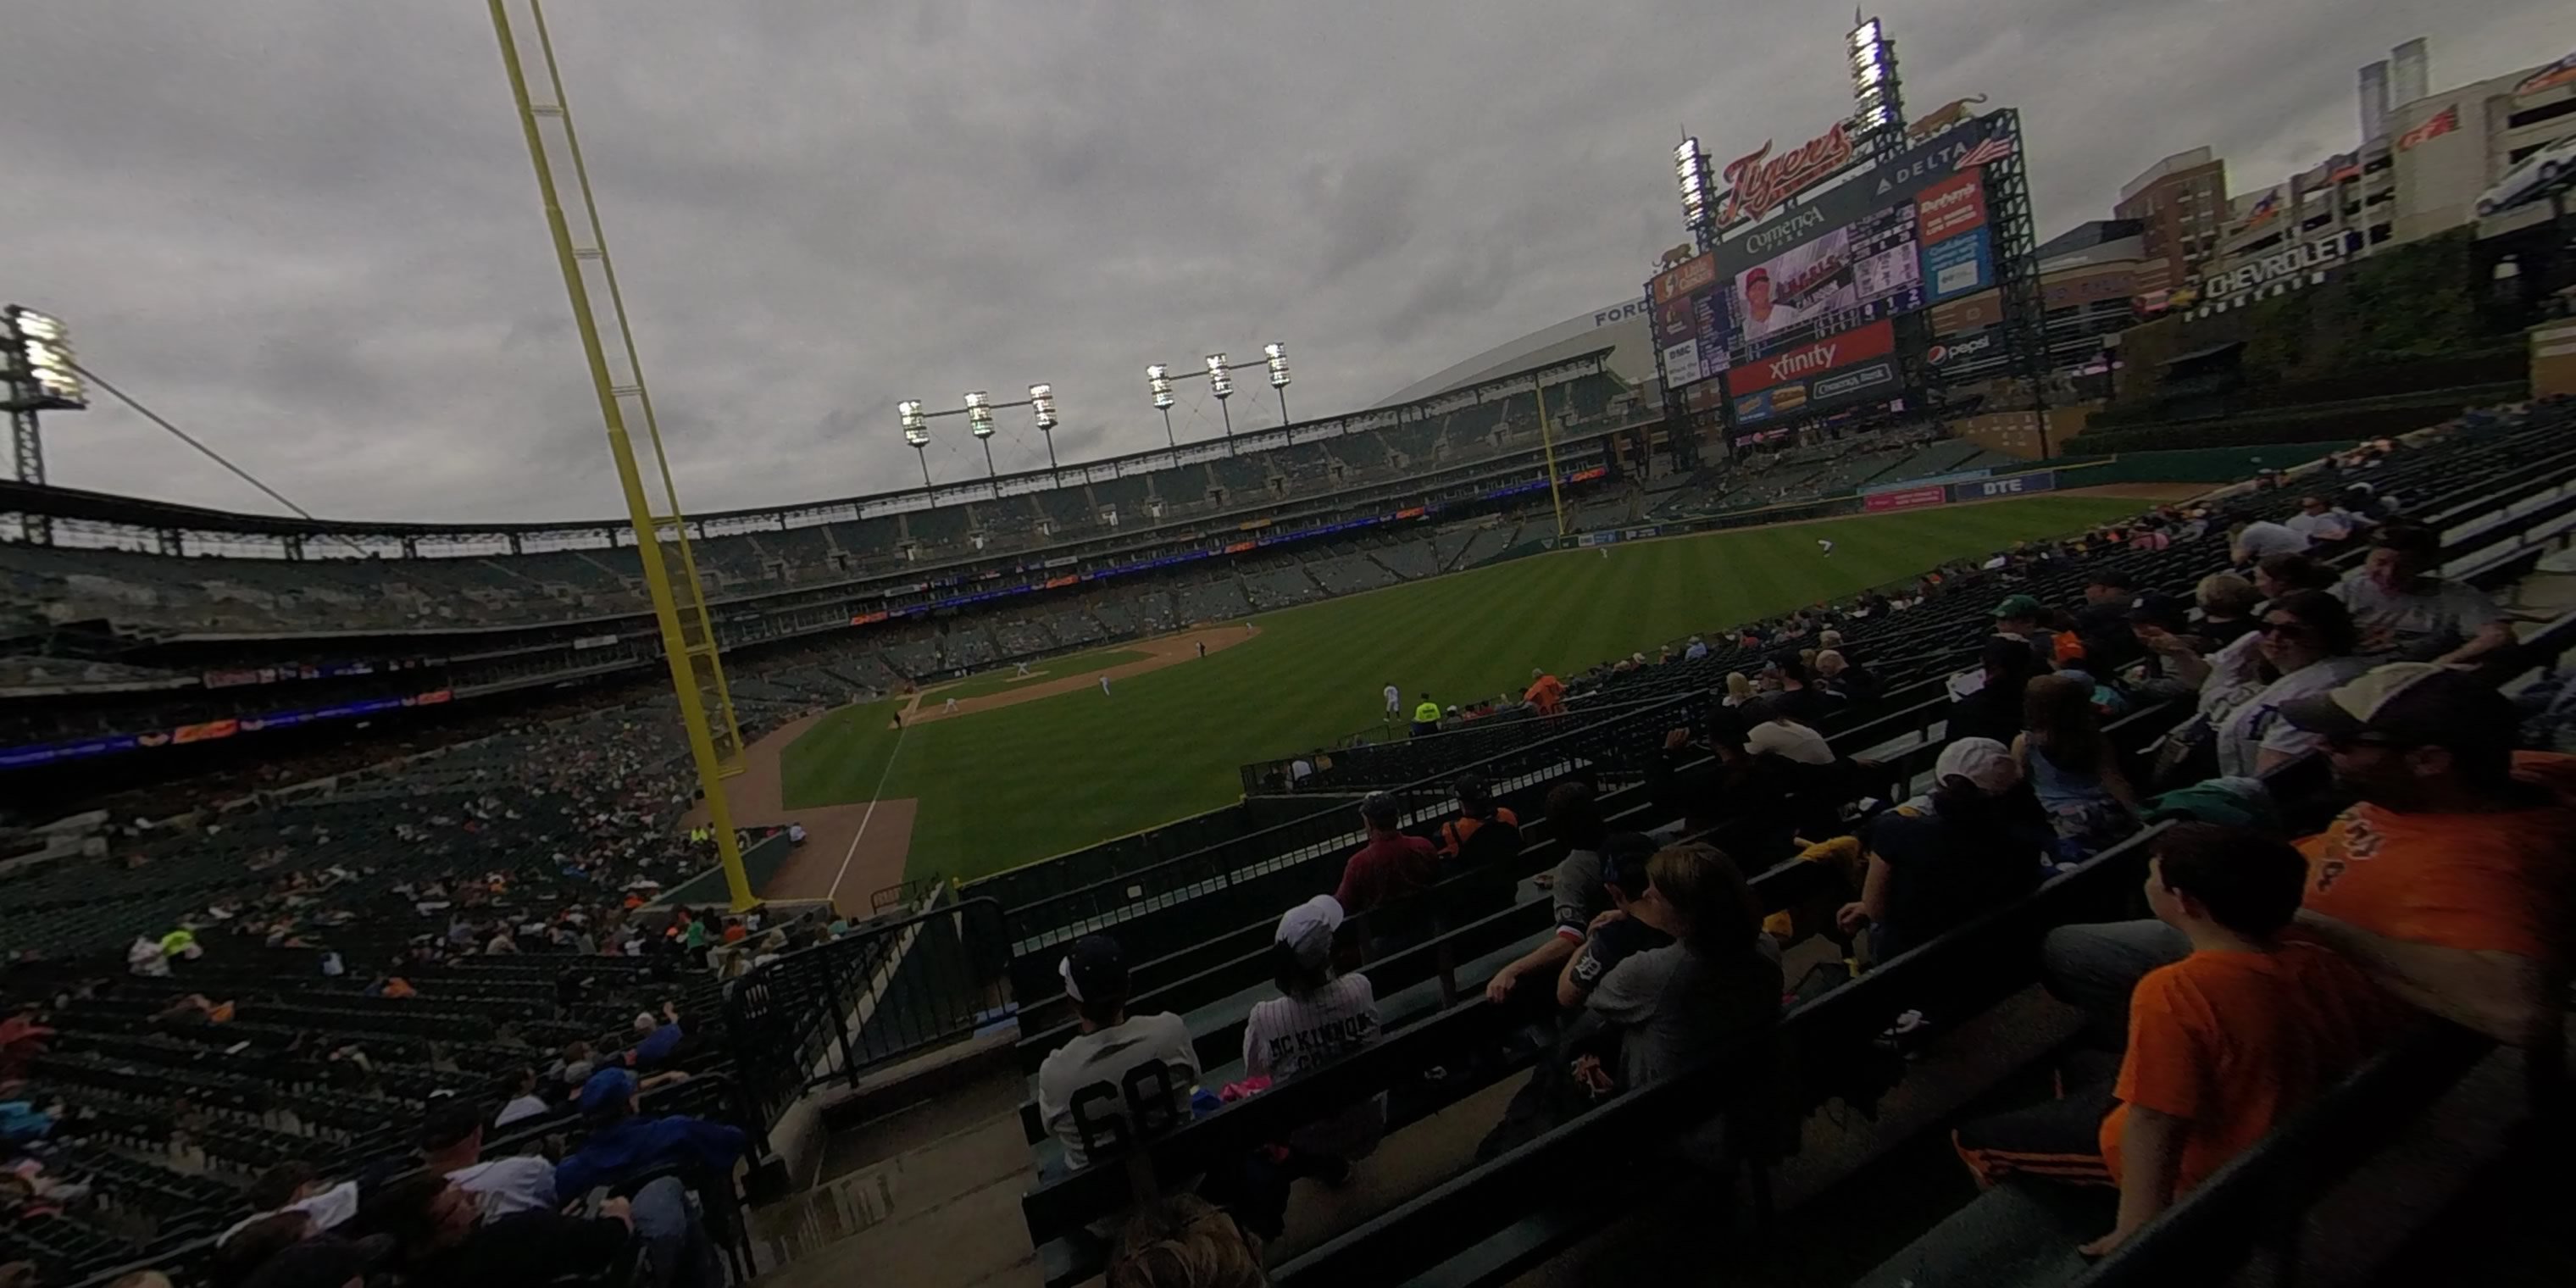 section 106 panoramic seat view  for baseball - comerica park